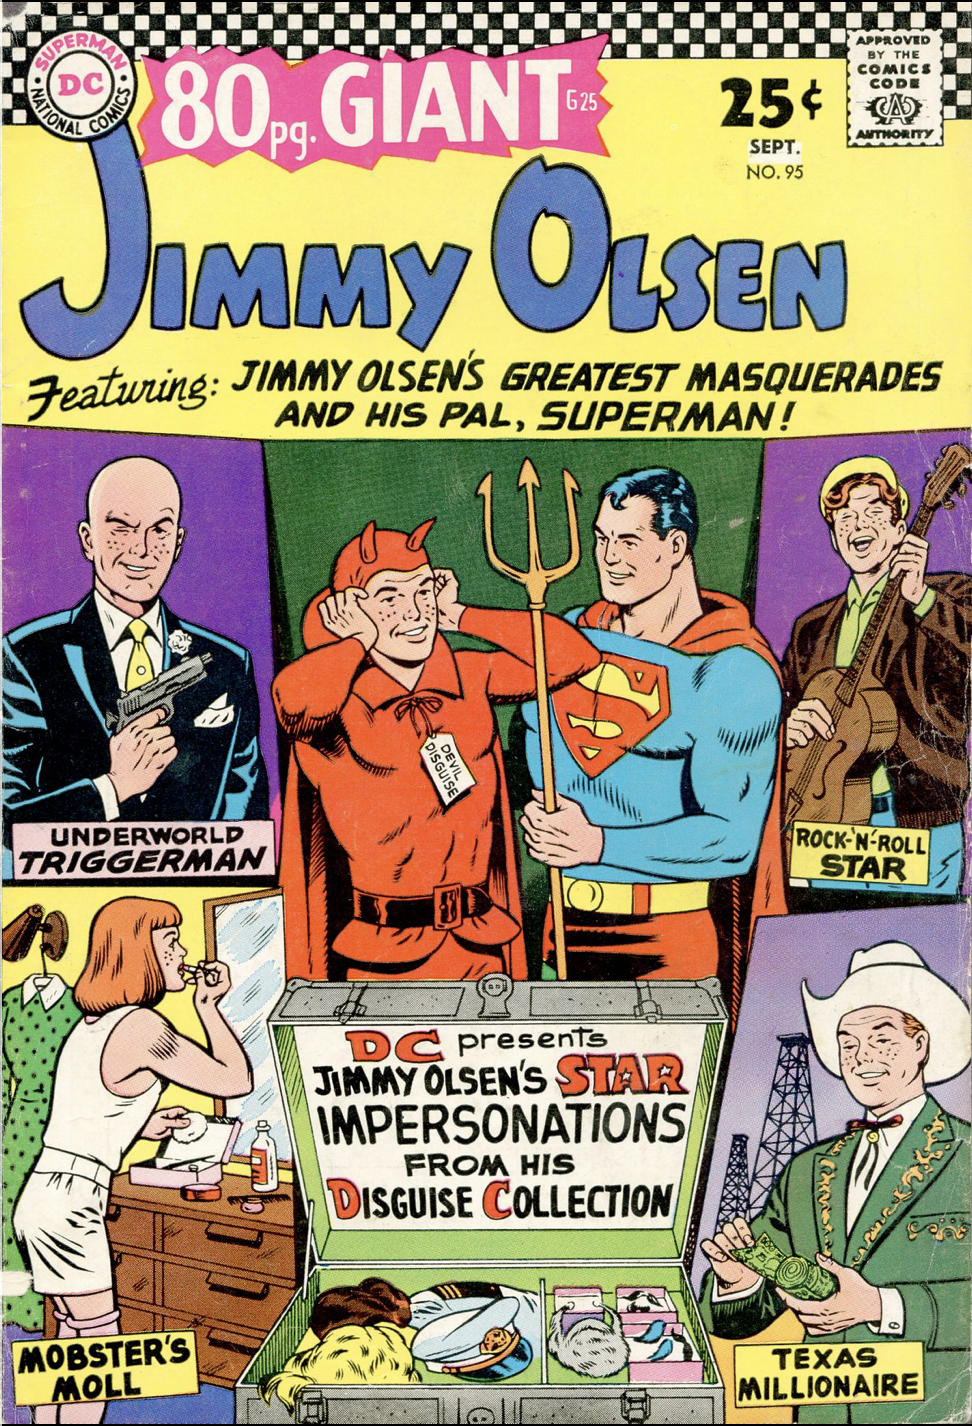 Cub Means Something Very Different in My Circles (Jimmy Olsen 95)